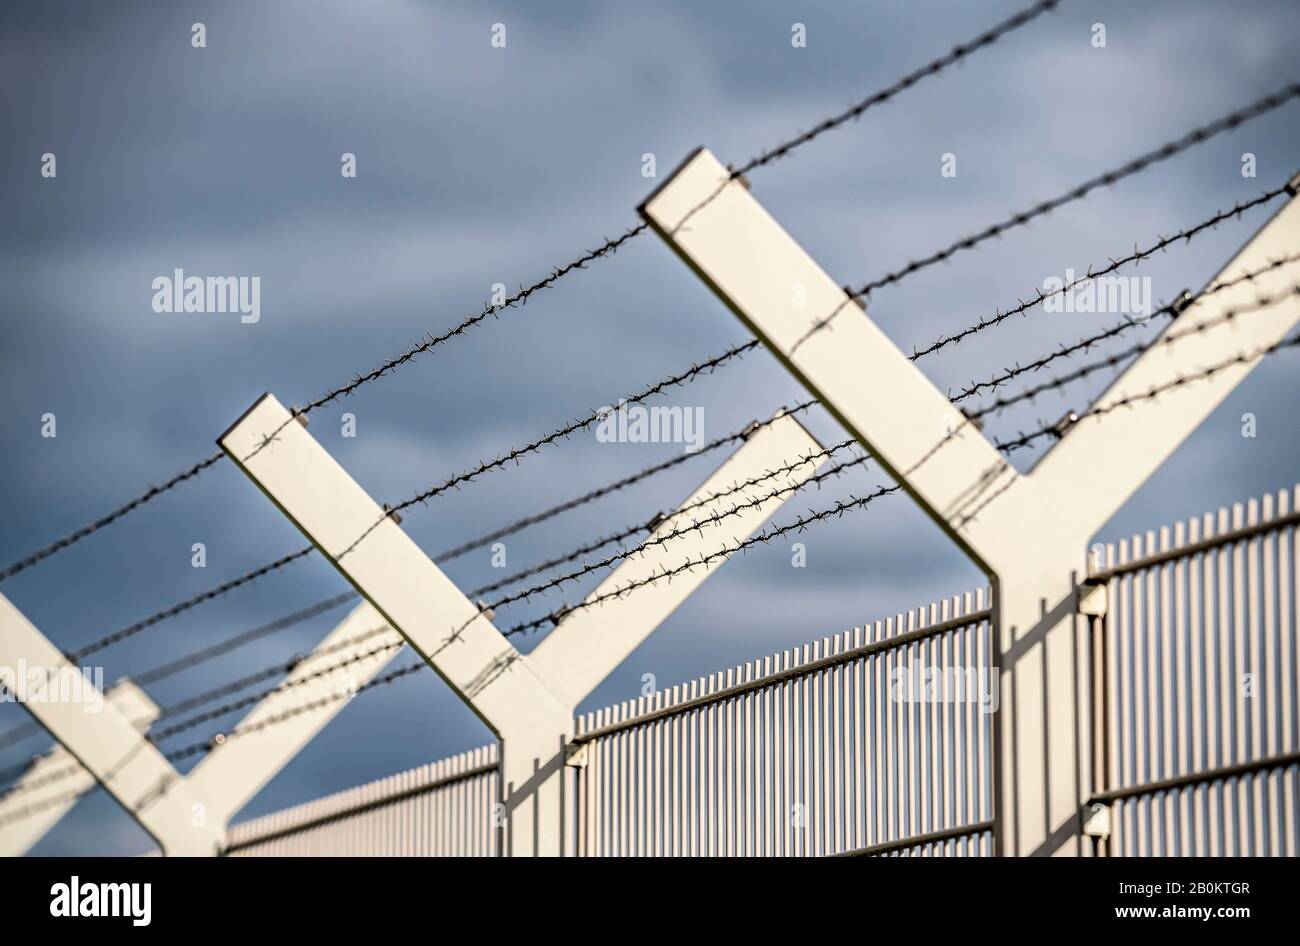 Fence, security fence, with barbed wire Y-crown, DŸsseldorf airport, Stock Photo